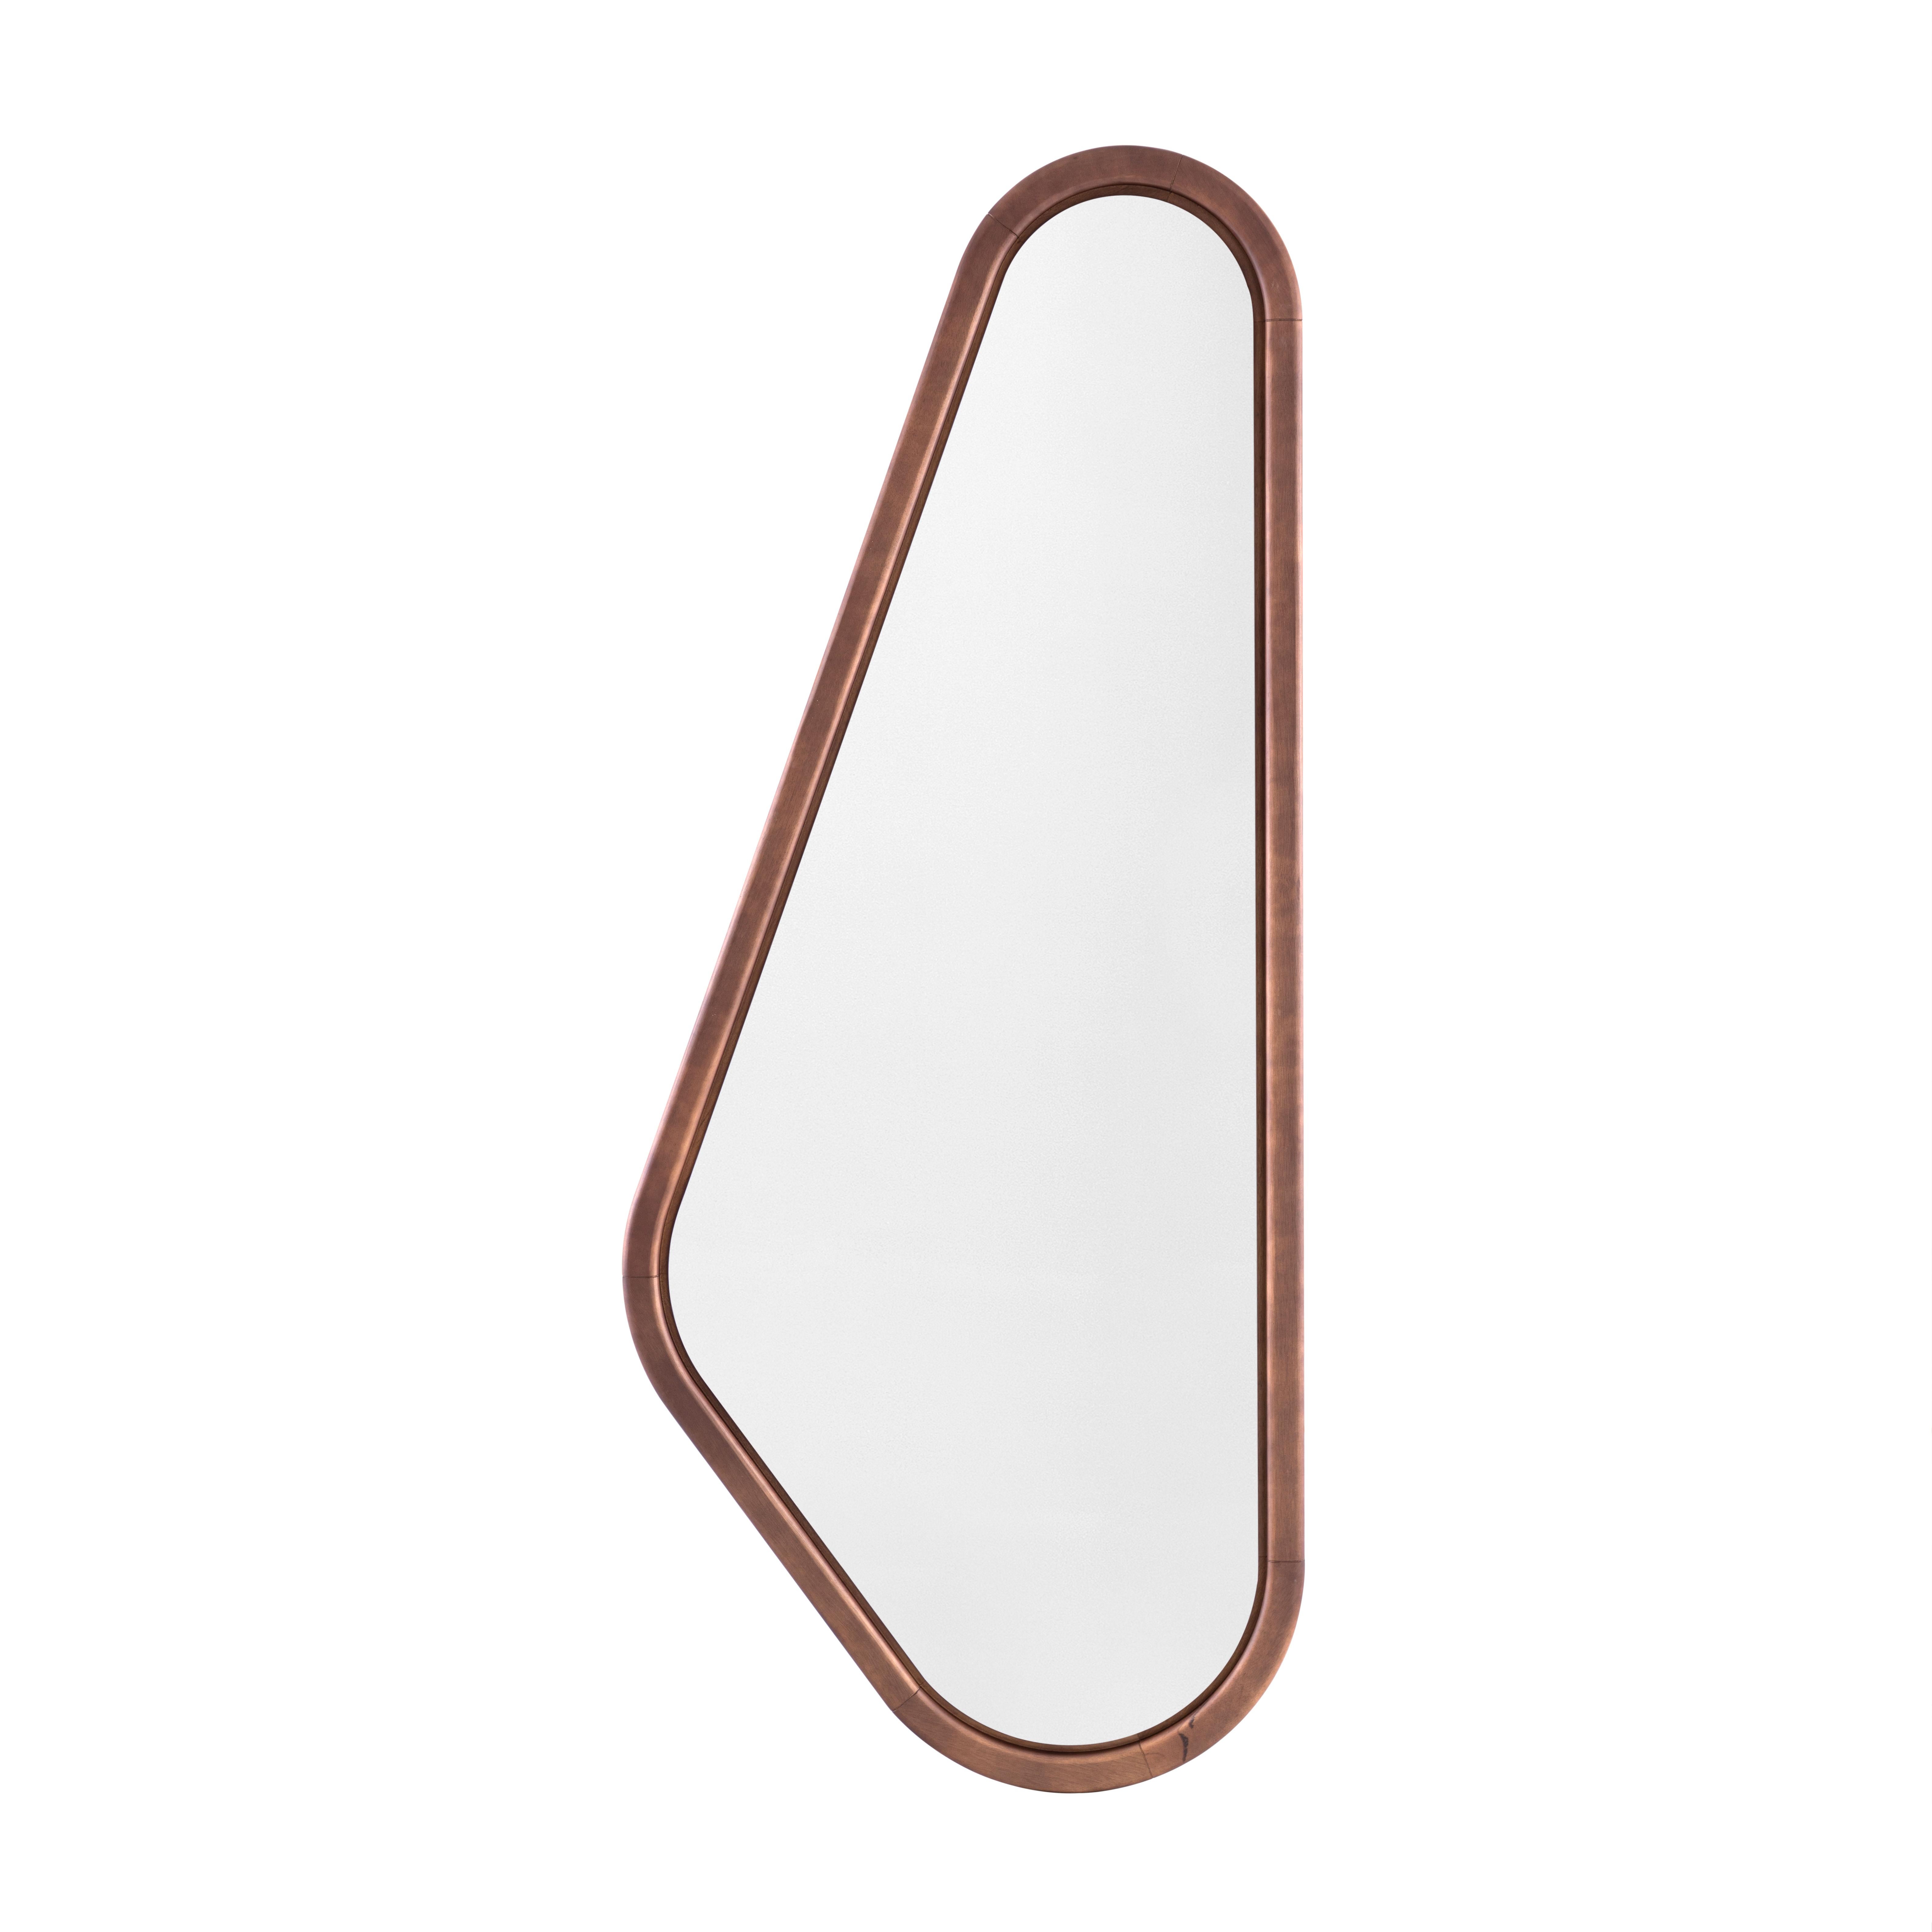 With a light and refined design, the Ali mirror incorporates a natural touch into any area of the home. Ali, which is the Italian word for ‘wings’, refers to the piece’s unique design. Together, the mirrors form two wings that bring a sense of